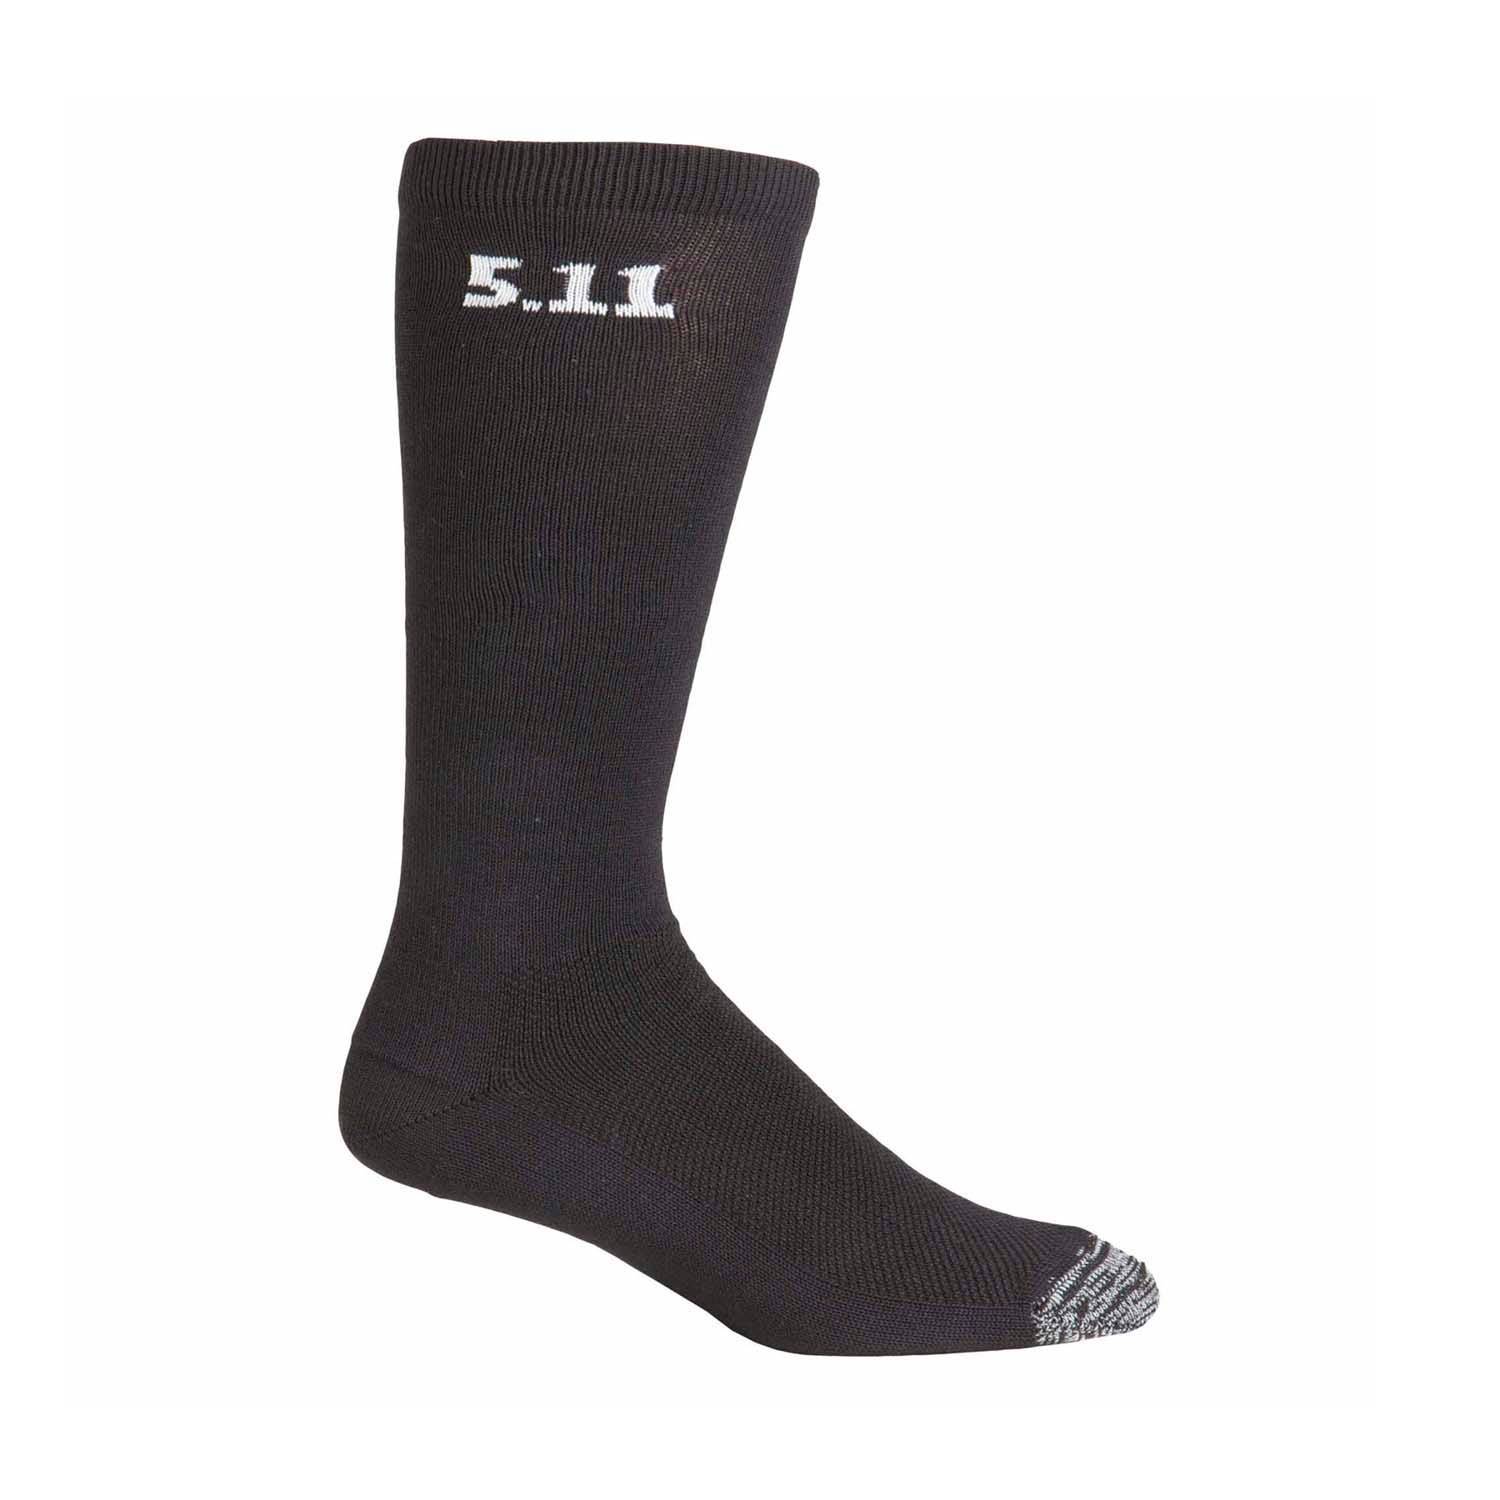 5.11 Tactical 3 Pack 9 inch Socks